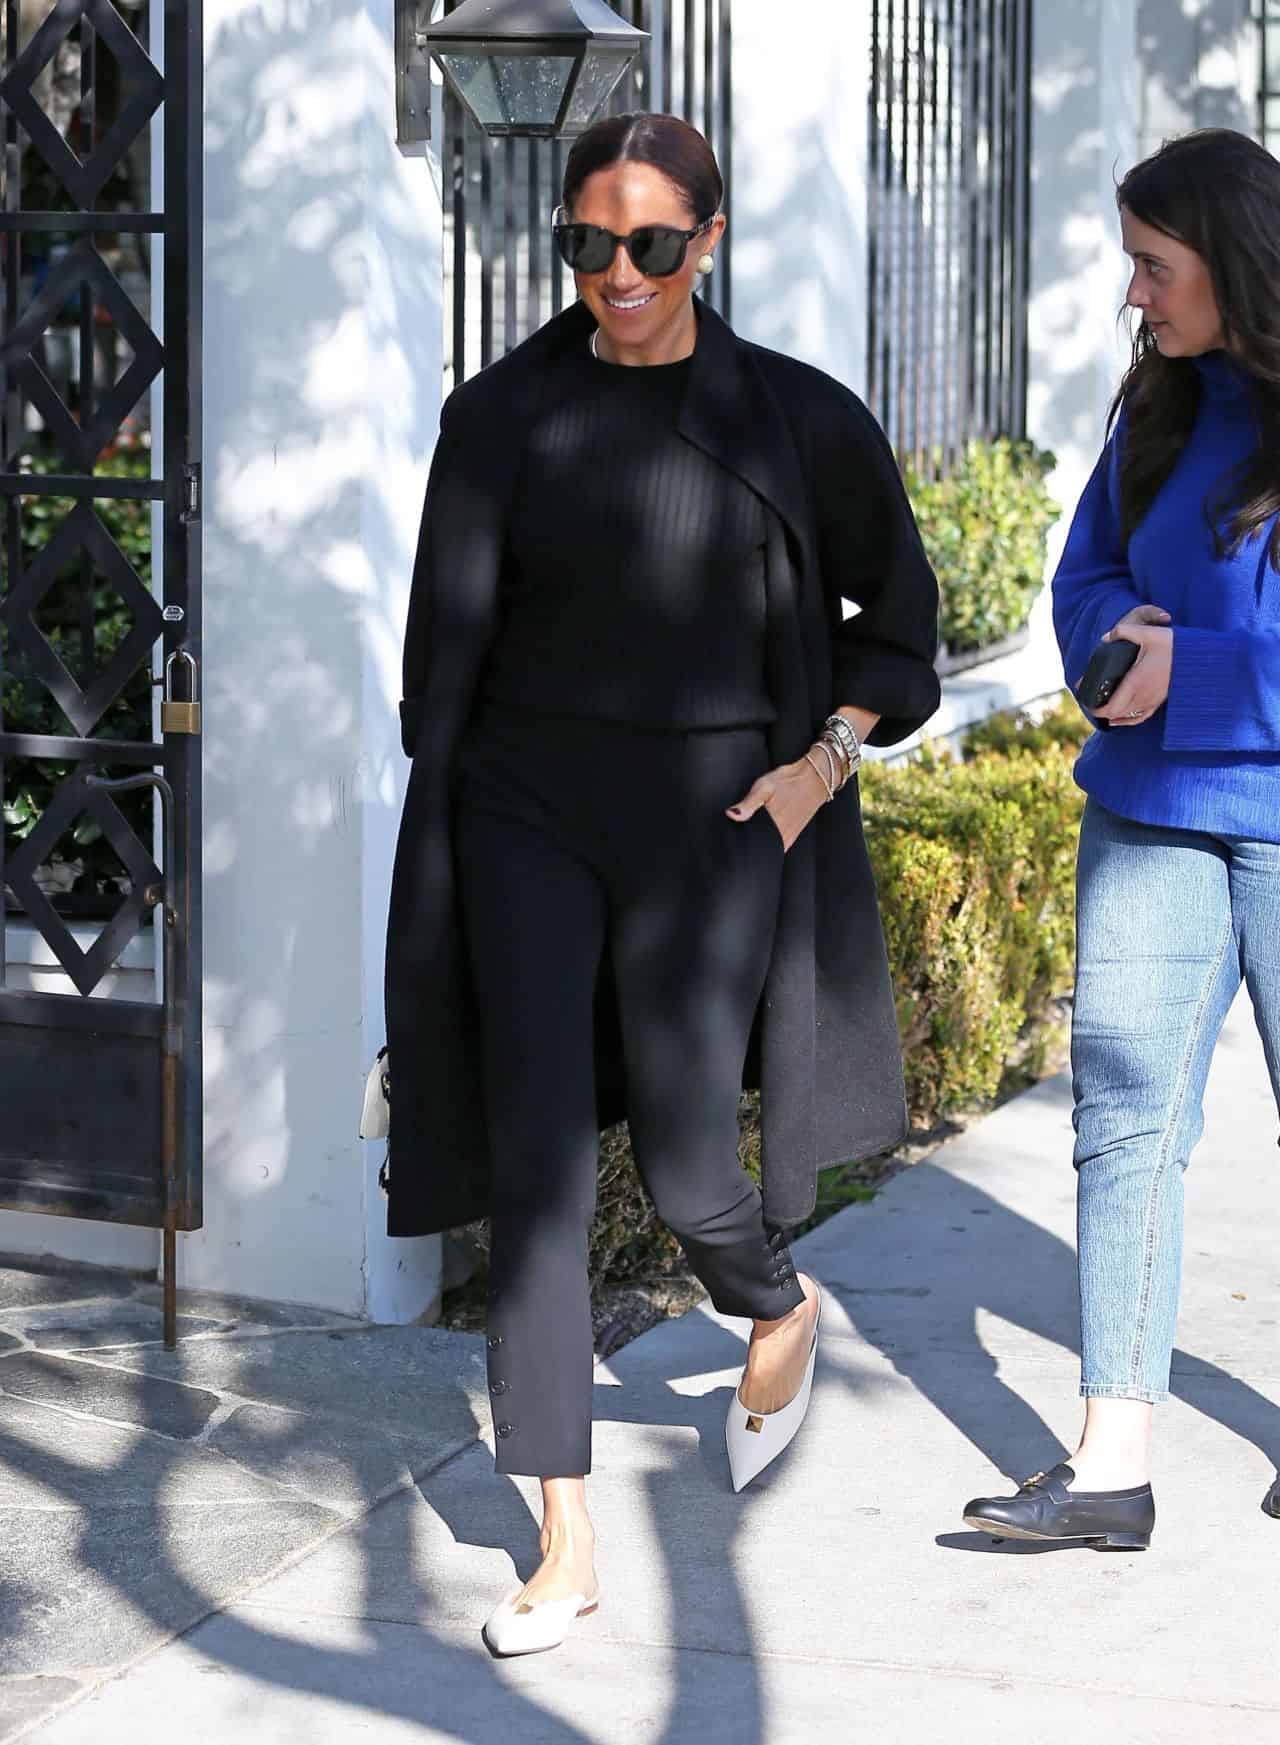 Meghan Markle Shows Off Her Street Style in a Sleek All-Black Outfit